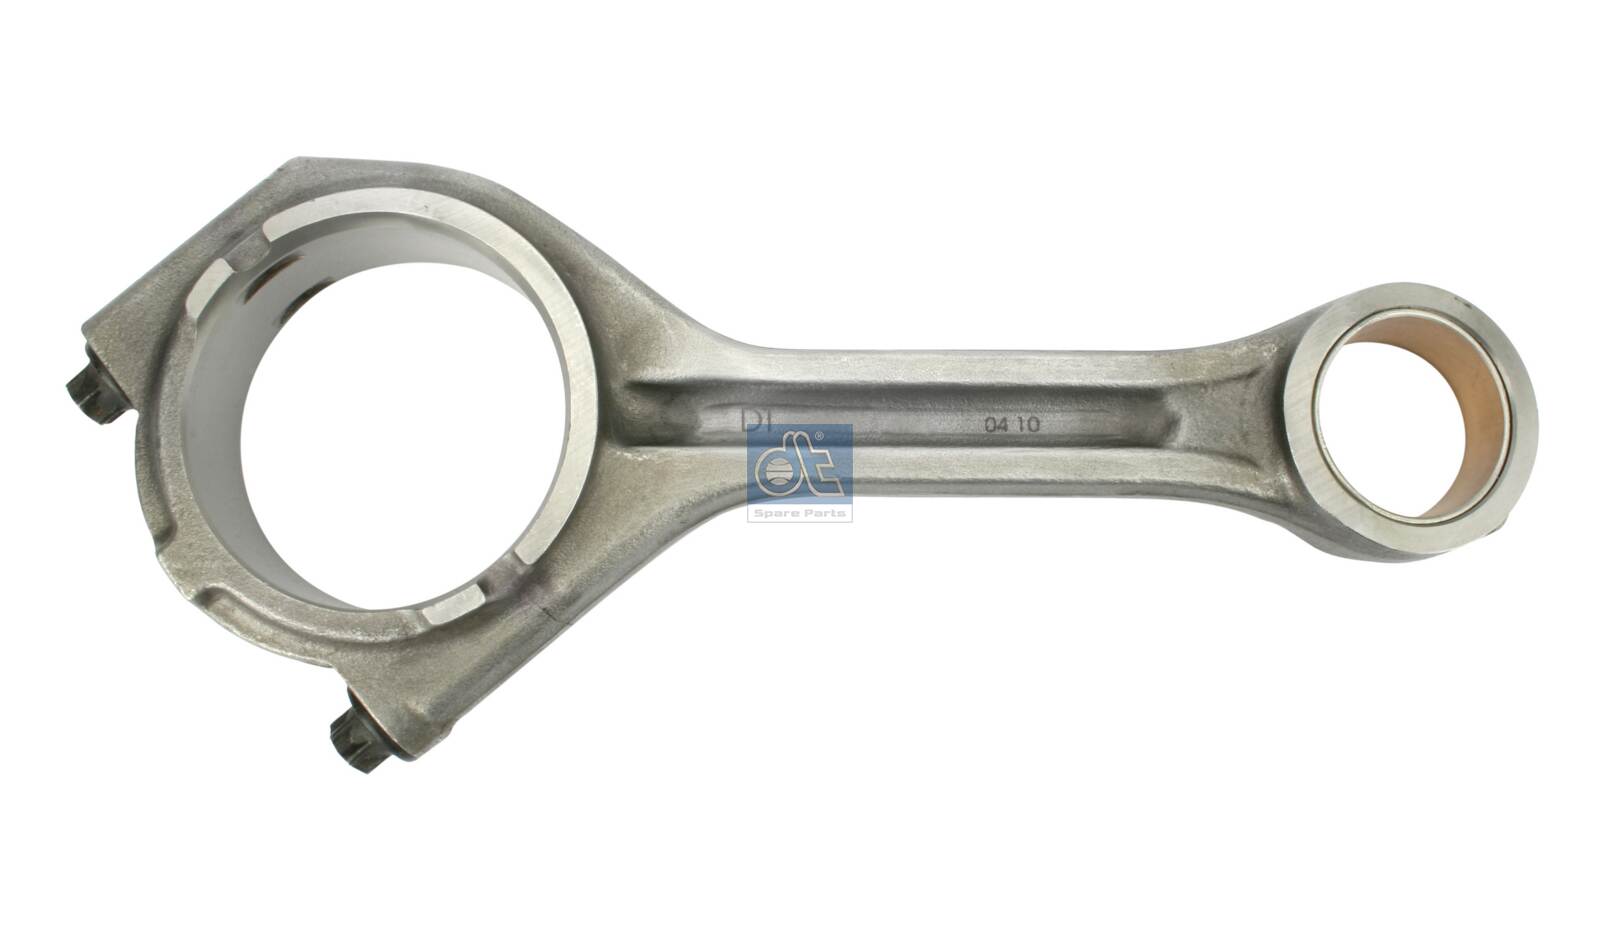 Connecting Rod - 3.11022 DT Spare Parts - 51.02401.6274, 51.02401.6243, 51.02401.6288